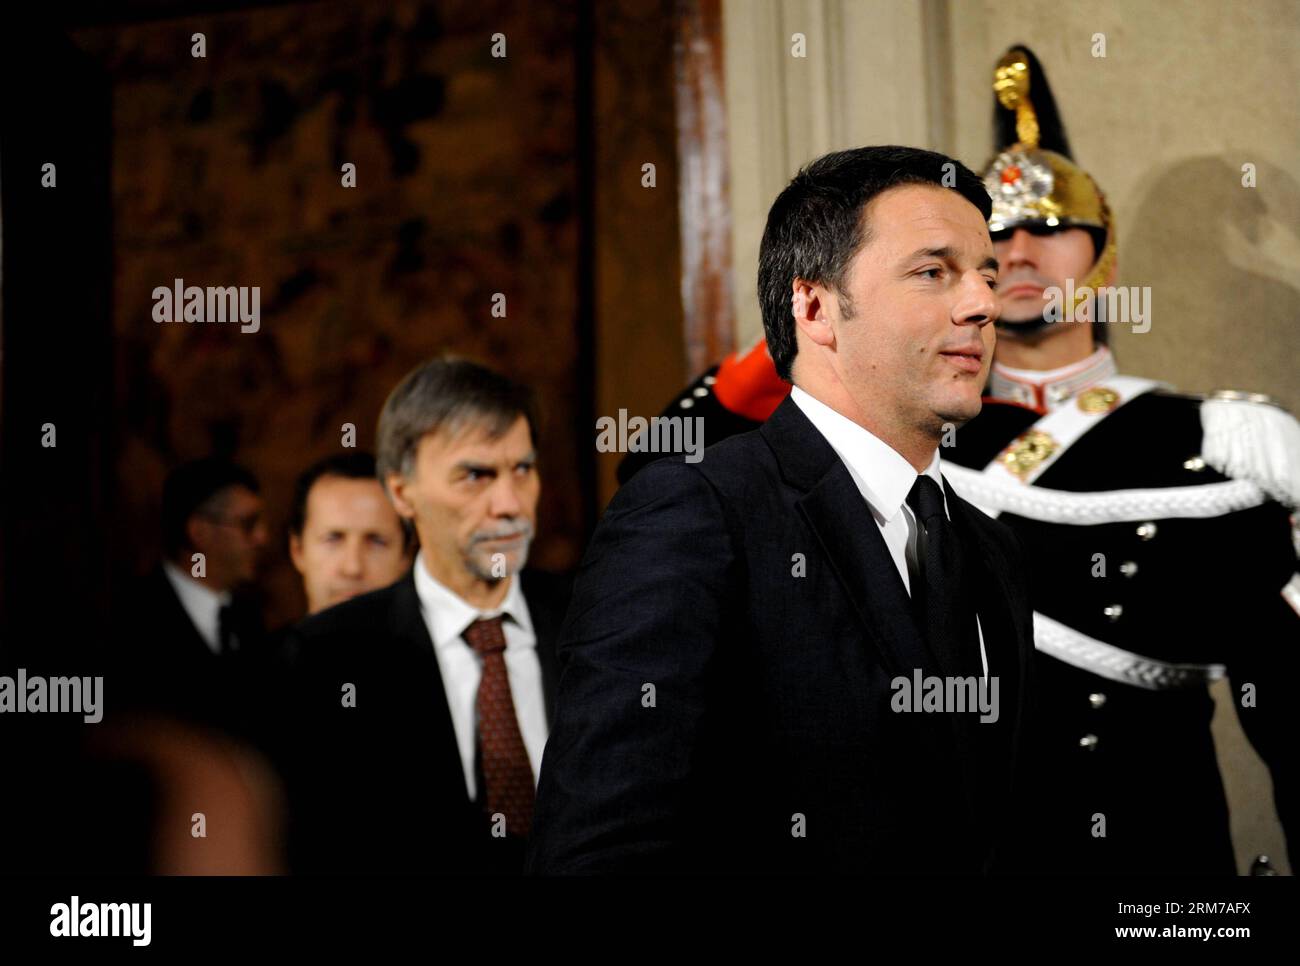 (140221) -- ROME, Feb. 21, 2014 (Xinhua) -- Newly appointed Italian Prime Minister Matteo Renzi (R) walks to a press conference after talking with Italian President Giorgio Napolitano in Quirinale Palace in Rome, Italy, on Feb. 21, 2014. After three days of consultations and reflection, Italy s center-left leader Matteo Renzi on Friday formally accepted the position of prime minister and presented his cabinet list to President Giorgio Napolitano. (Xinhua/Xu Nizhi) ITALY-ROME-RENZI-NEW CABINET-SETTING UP PUBLICATIONxNOTxINxCHN   Rome Feb 21 2014 XINHUA newly Appointed Italian Prime Ministers Ma Stock Photo